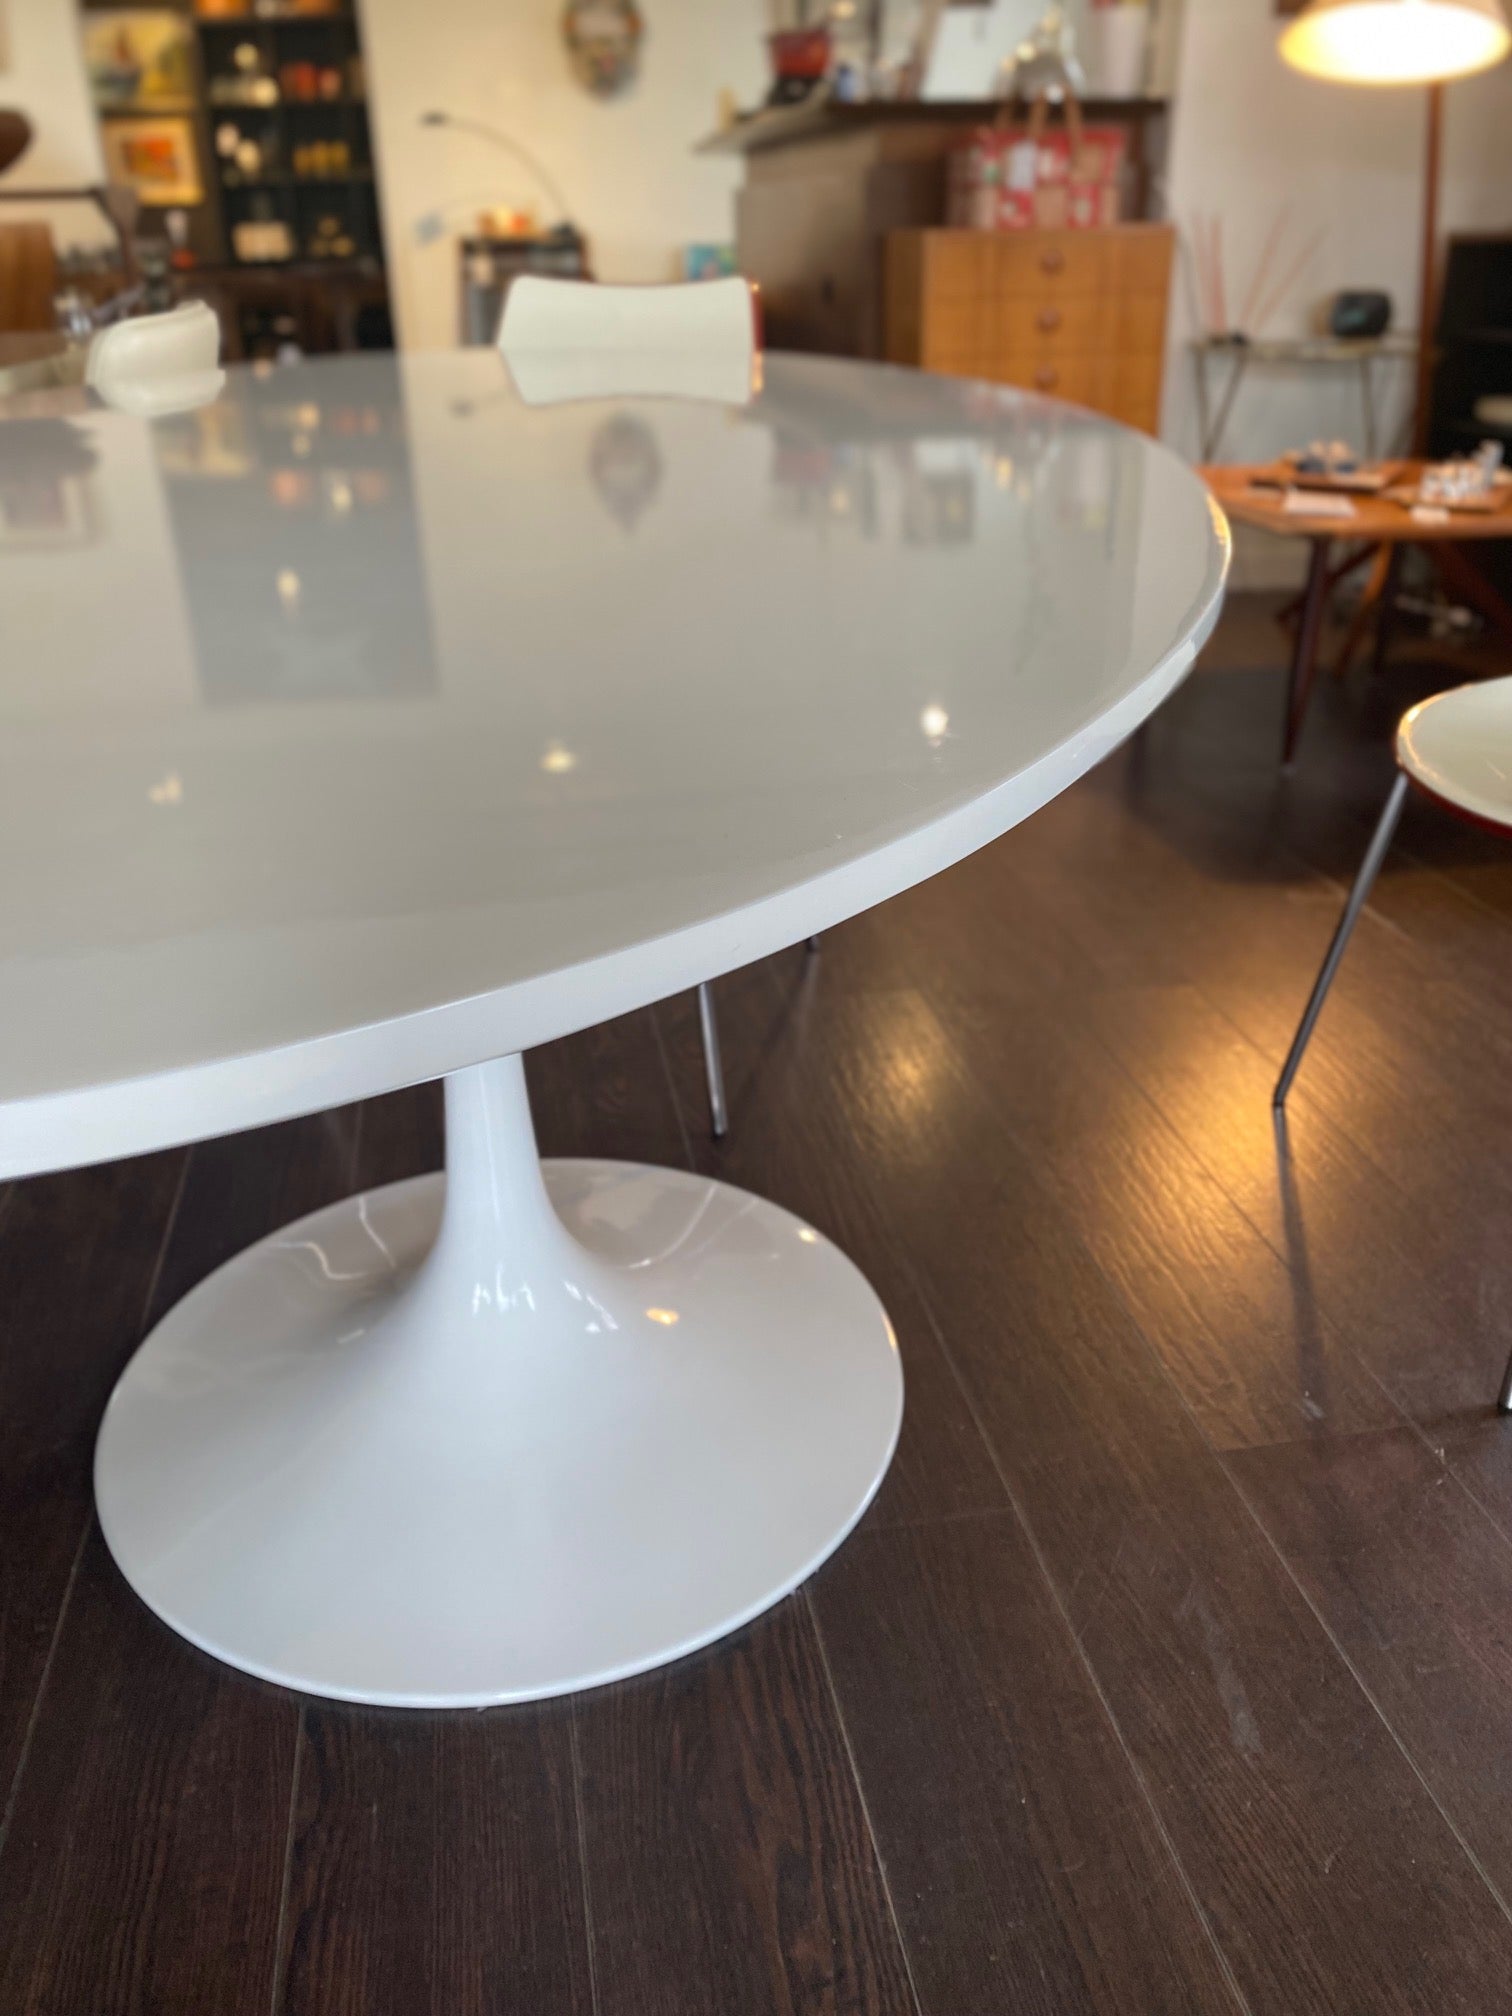 Stunning white laminate tulip table. Gorgeous beveled edge and metal base. In nice overall condition with some scratching on table surface. Shown with orange Calligaris "Jam" dining chairs- Cook Street Vintage